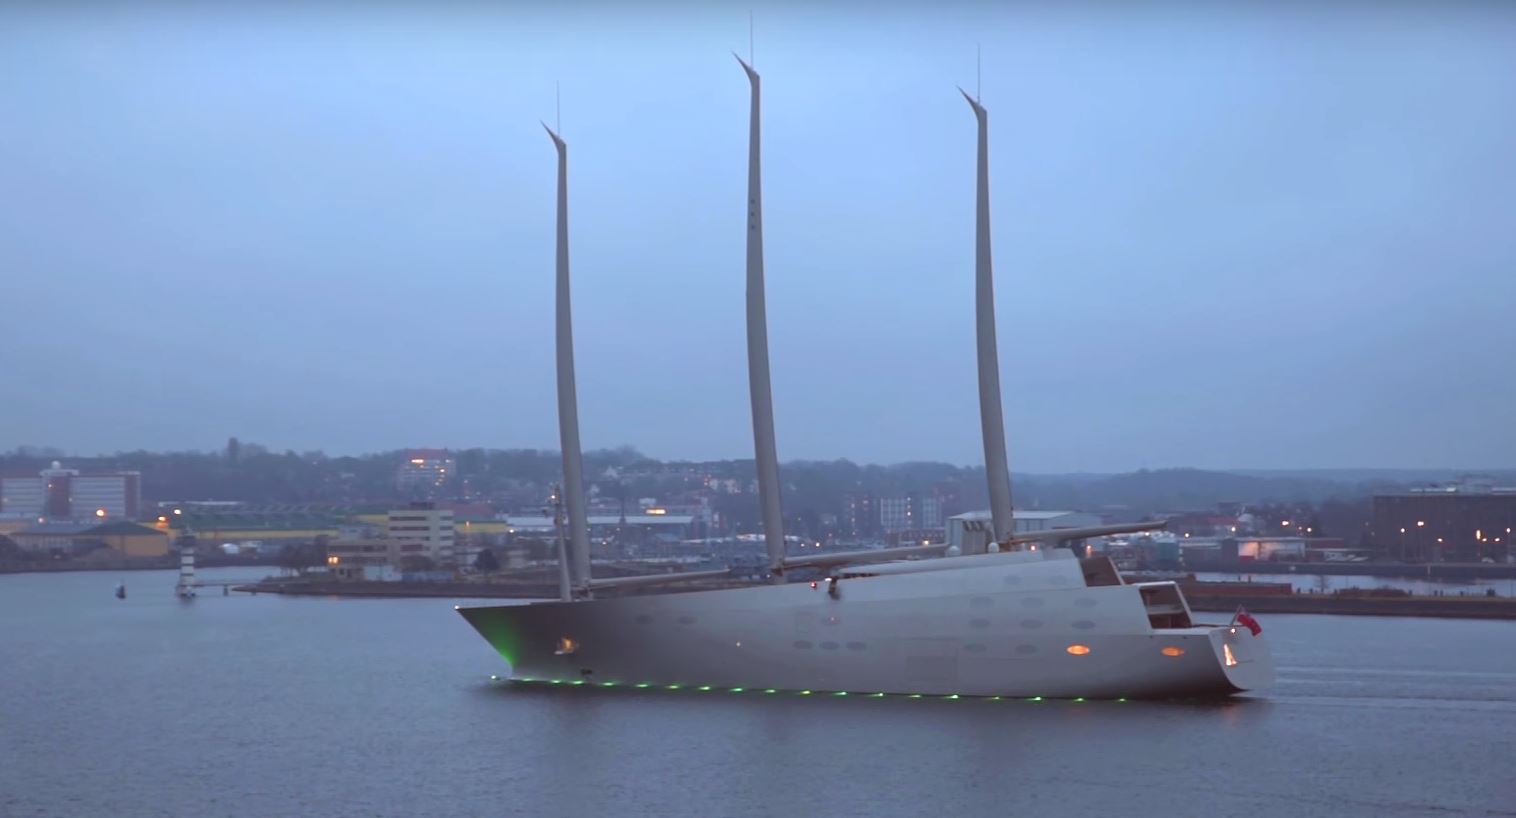 Russian billionaire’s mammoth £360 million ‘Sailing Yacht A’ superyacht with masts taller than Big Ben dwarves tankers as it pulls into Gibraltar after a week of sea trials.